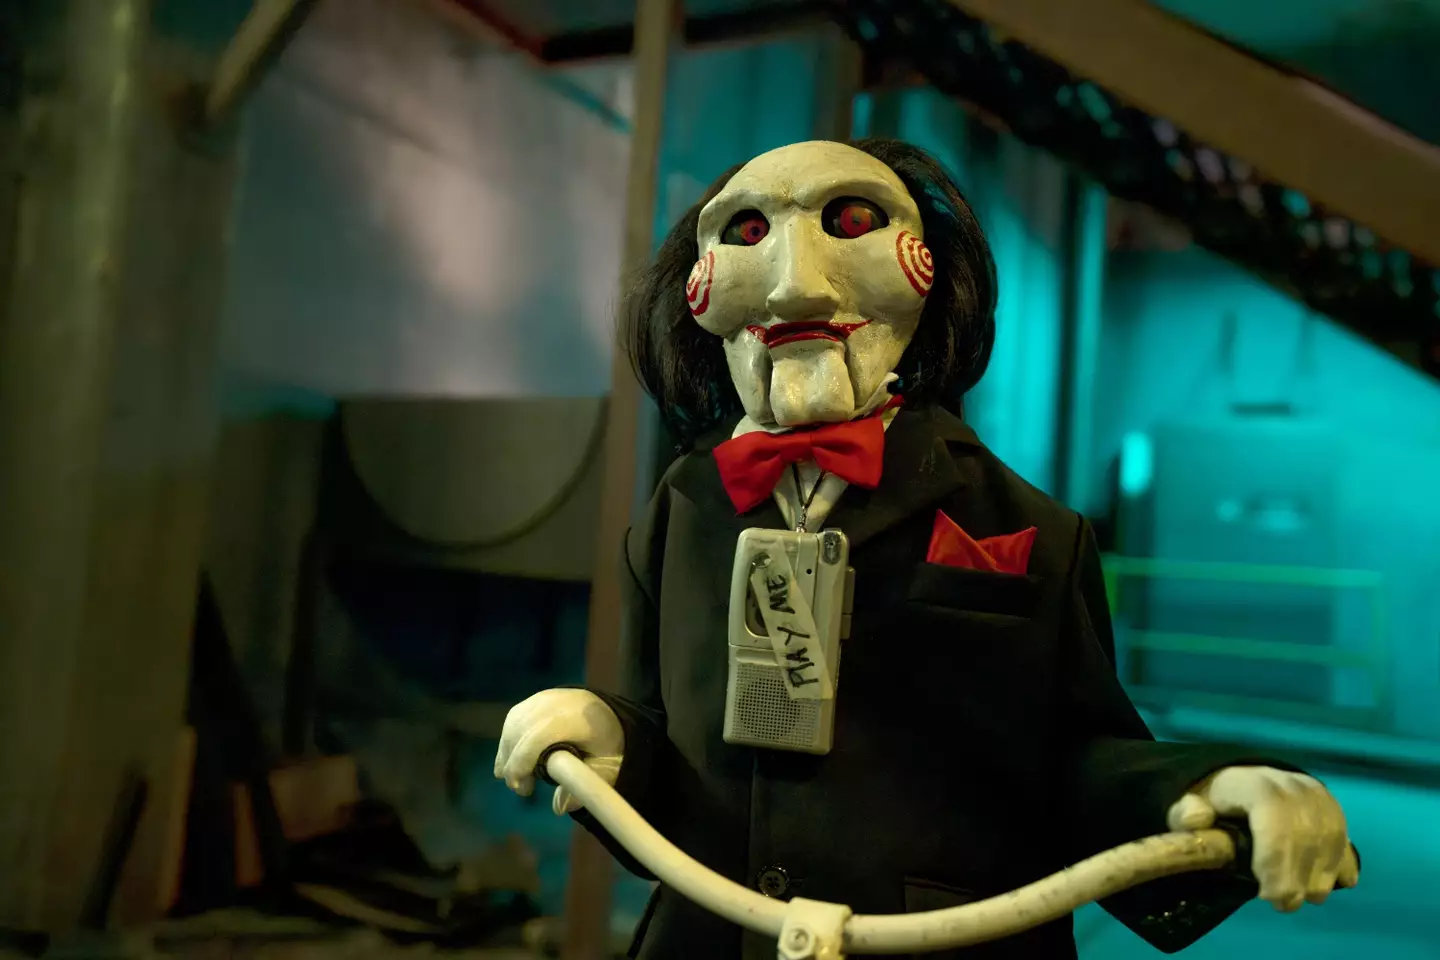 Jigsaw is back in Saw X with even more terrifying traps.